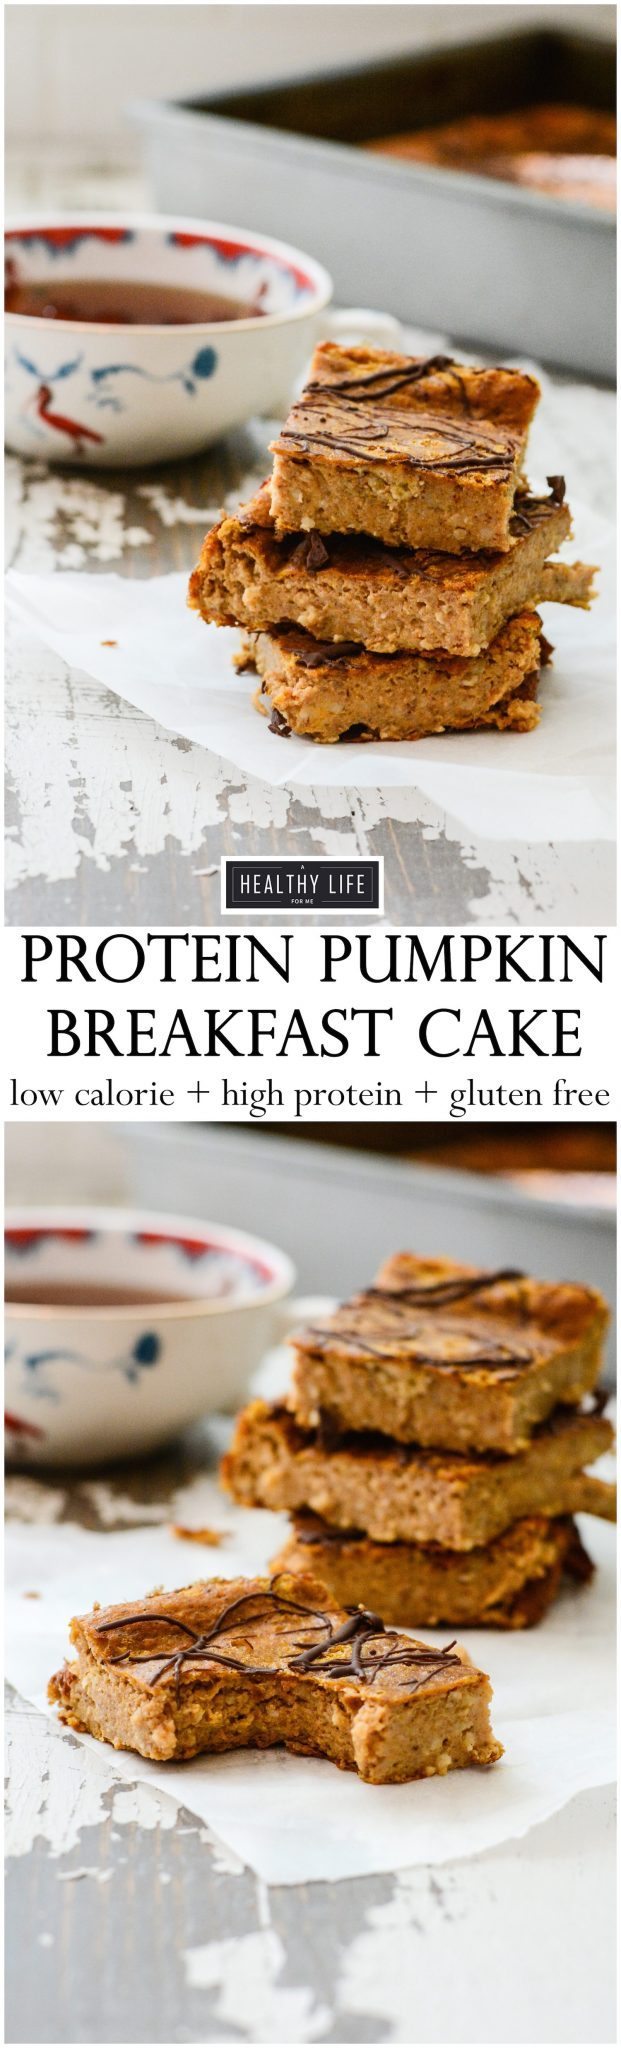 A collage of two images of a protein pumpkin breakfast cake on a dining table